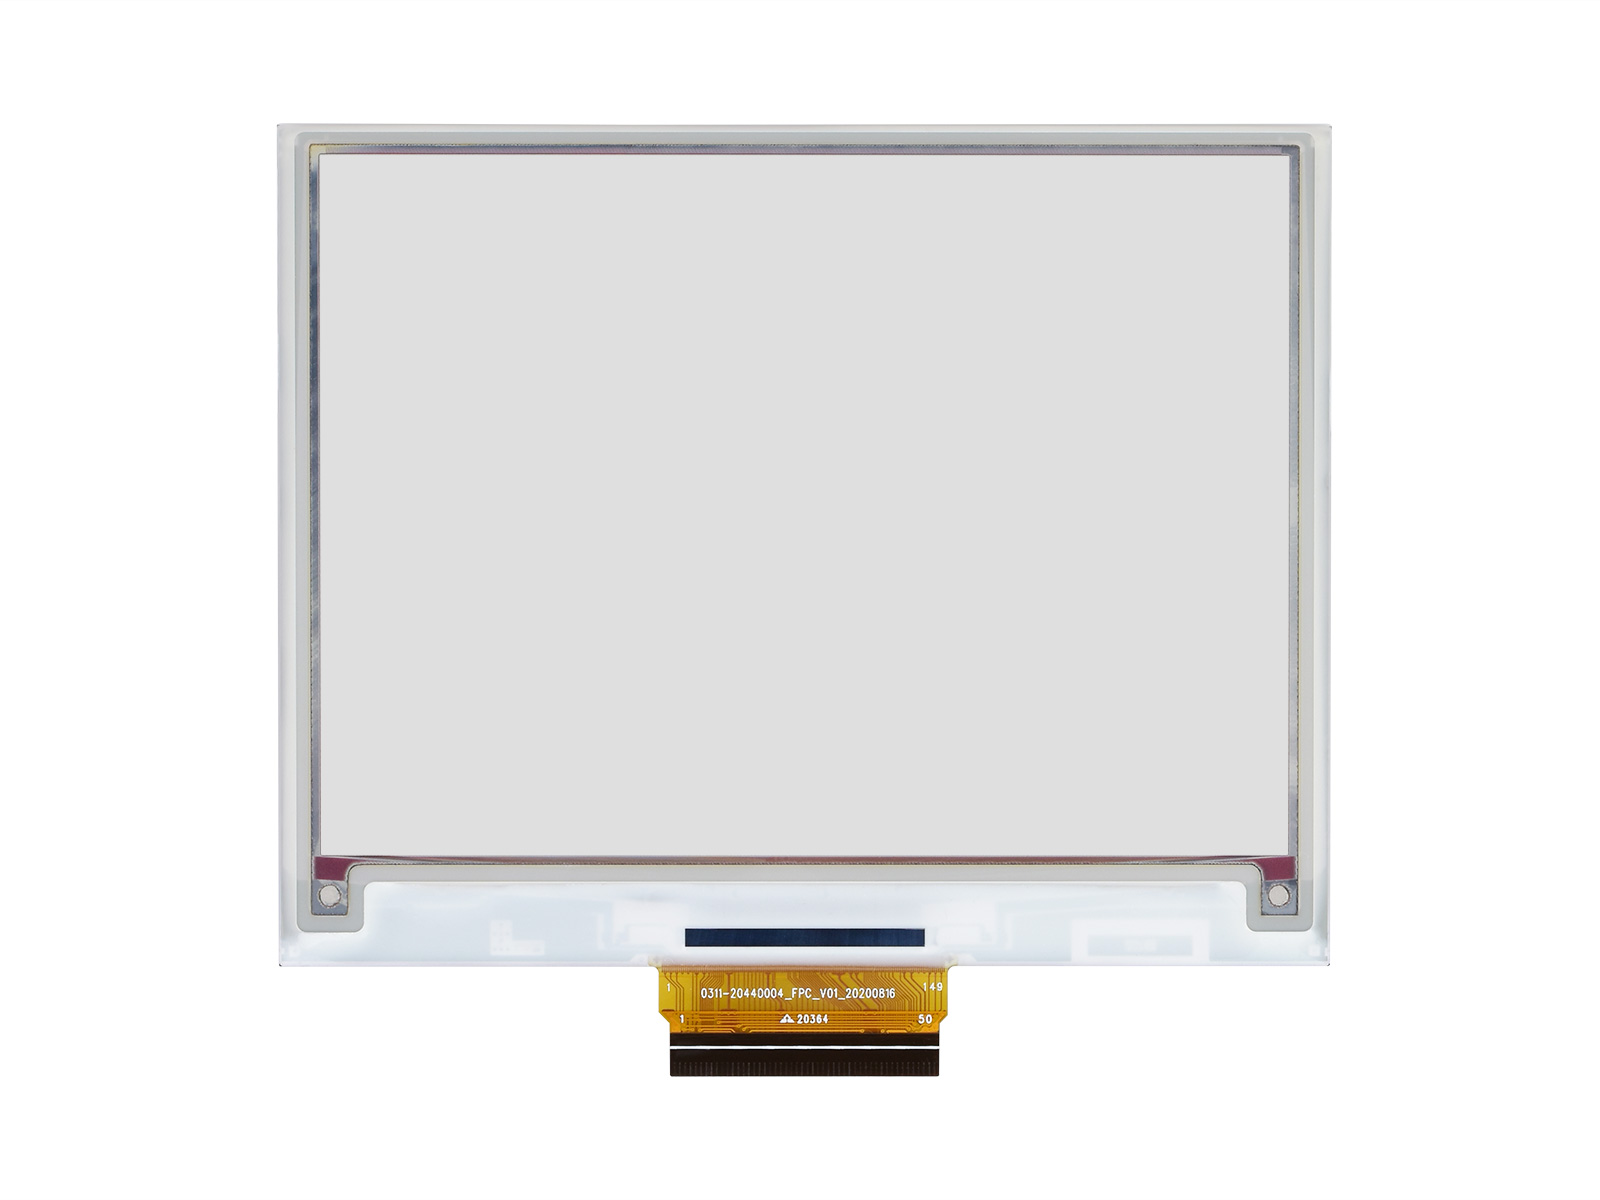 4.37inch E-Paper (G) raw display, 512 * 368, Red/Yellow/Black/White